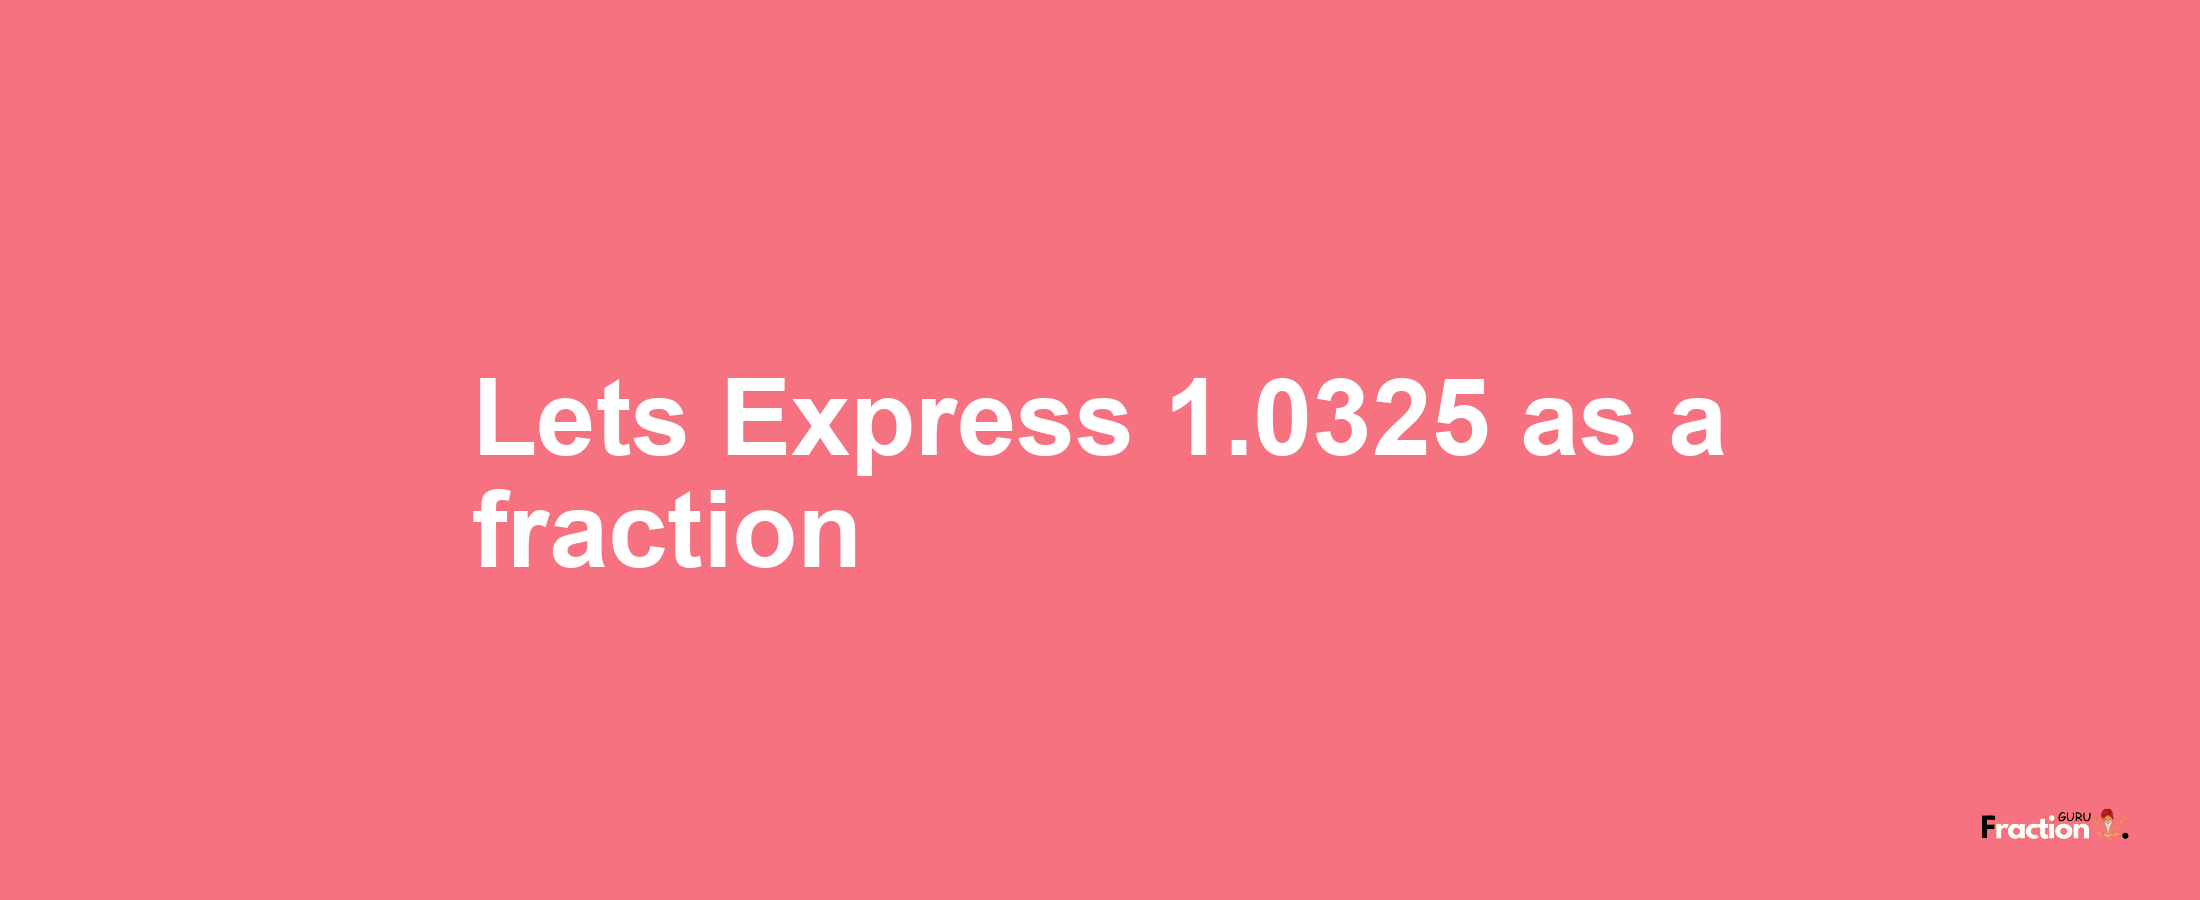 Lets Express 1.0325 as afraction